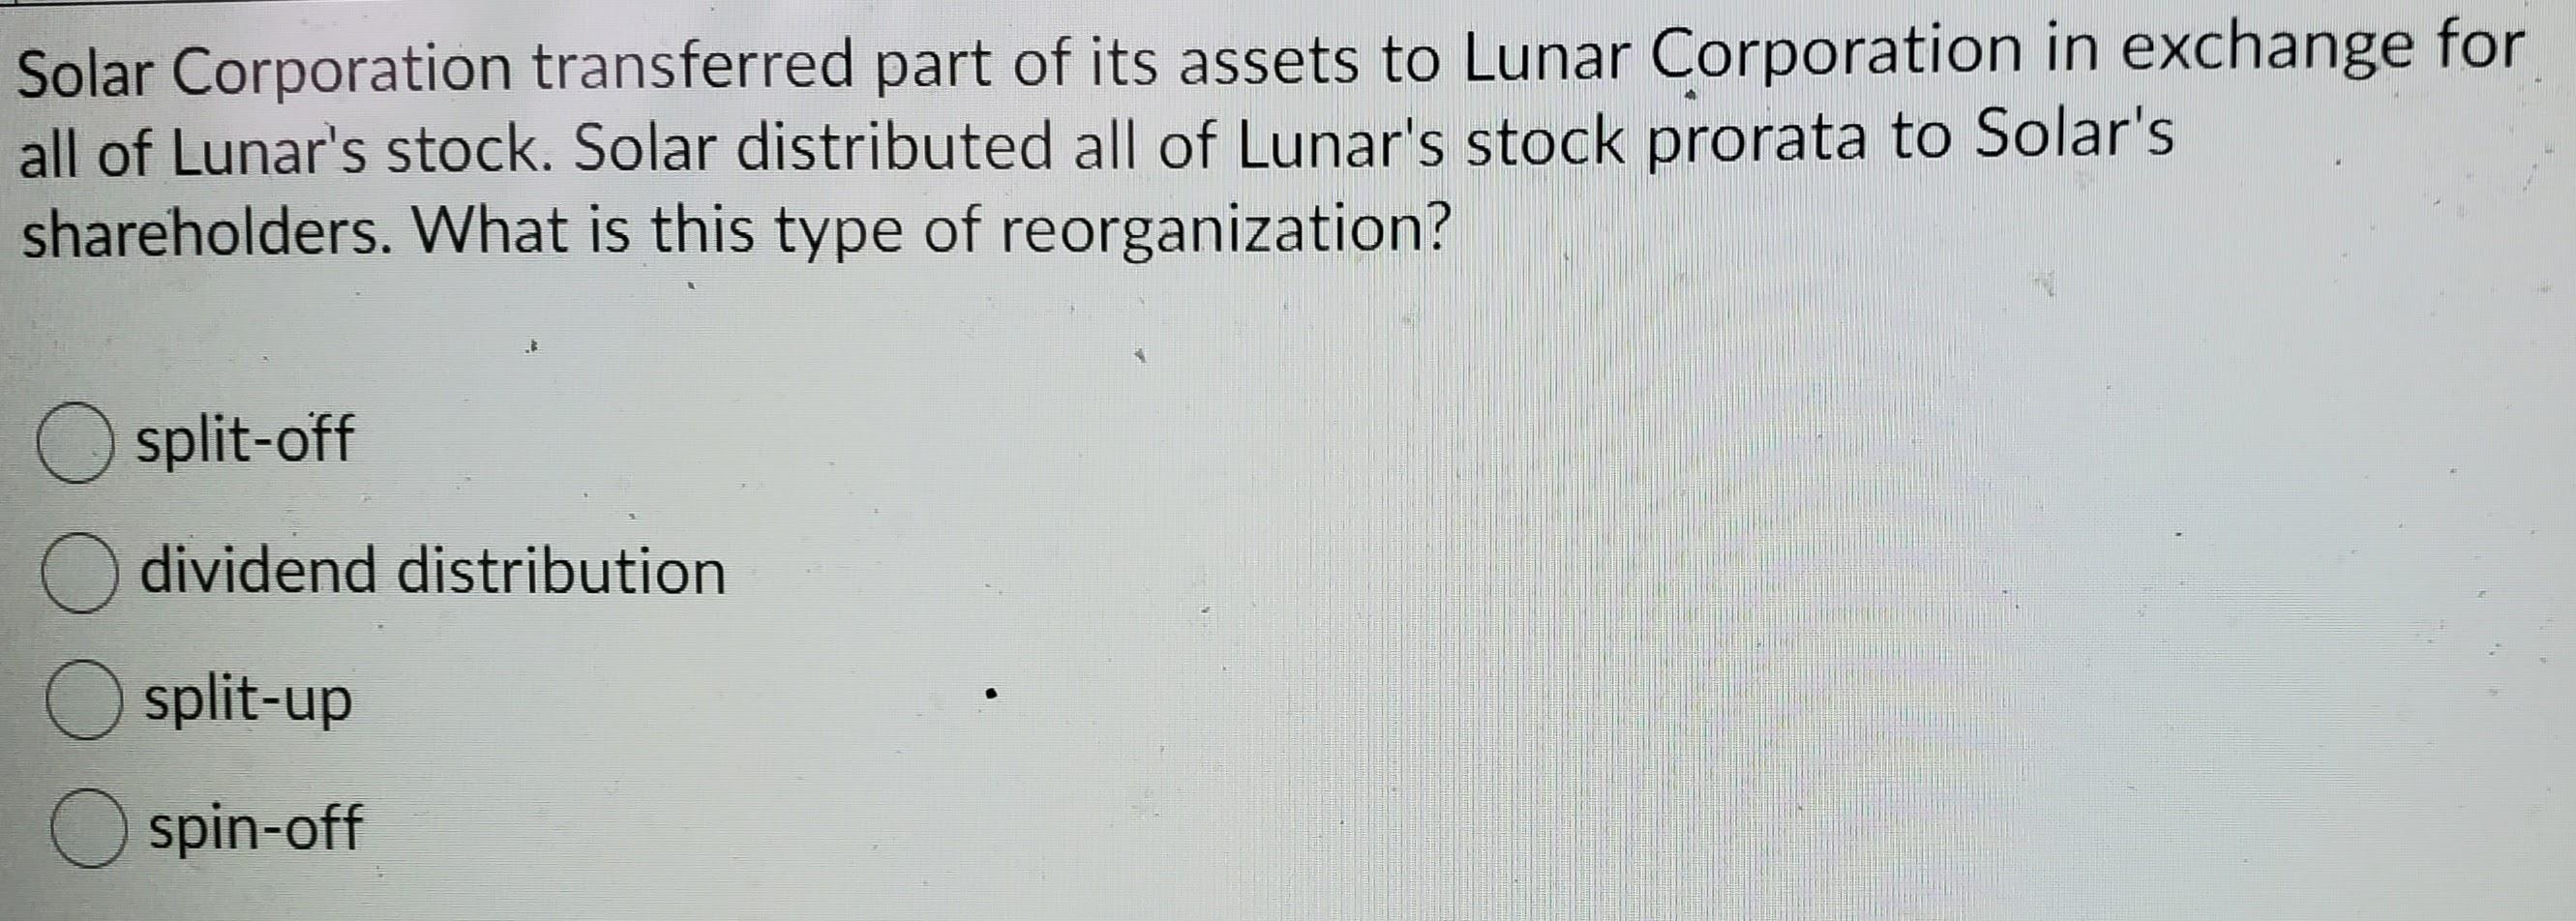 Solar Corporation transferred part of its assets to Lunar Corporation in exchange forall of Lunars stock. Solar distributed